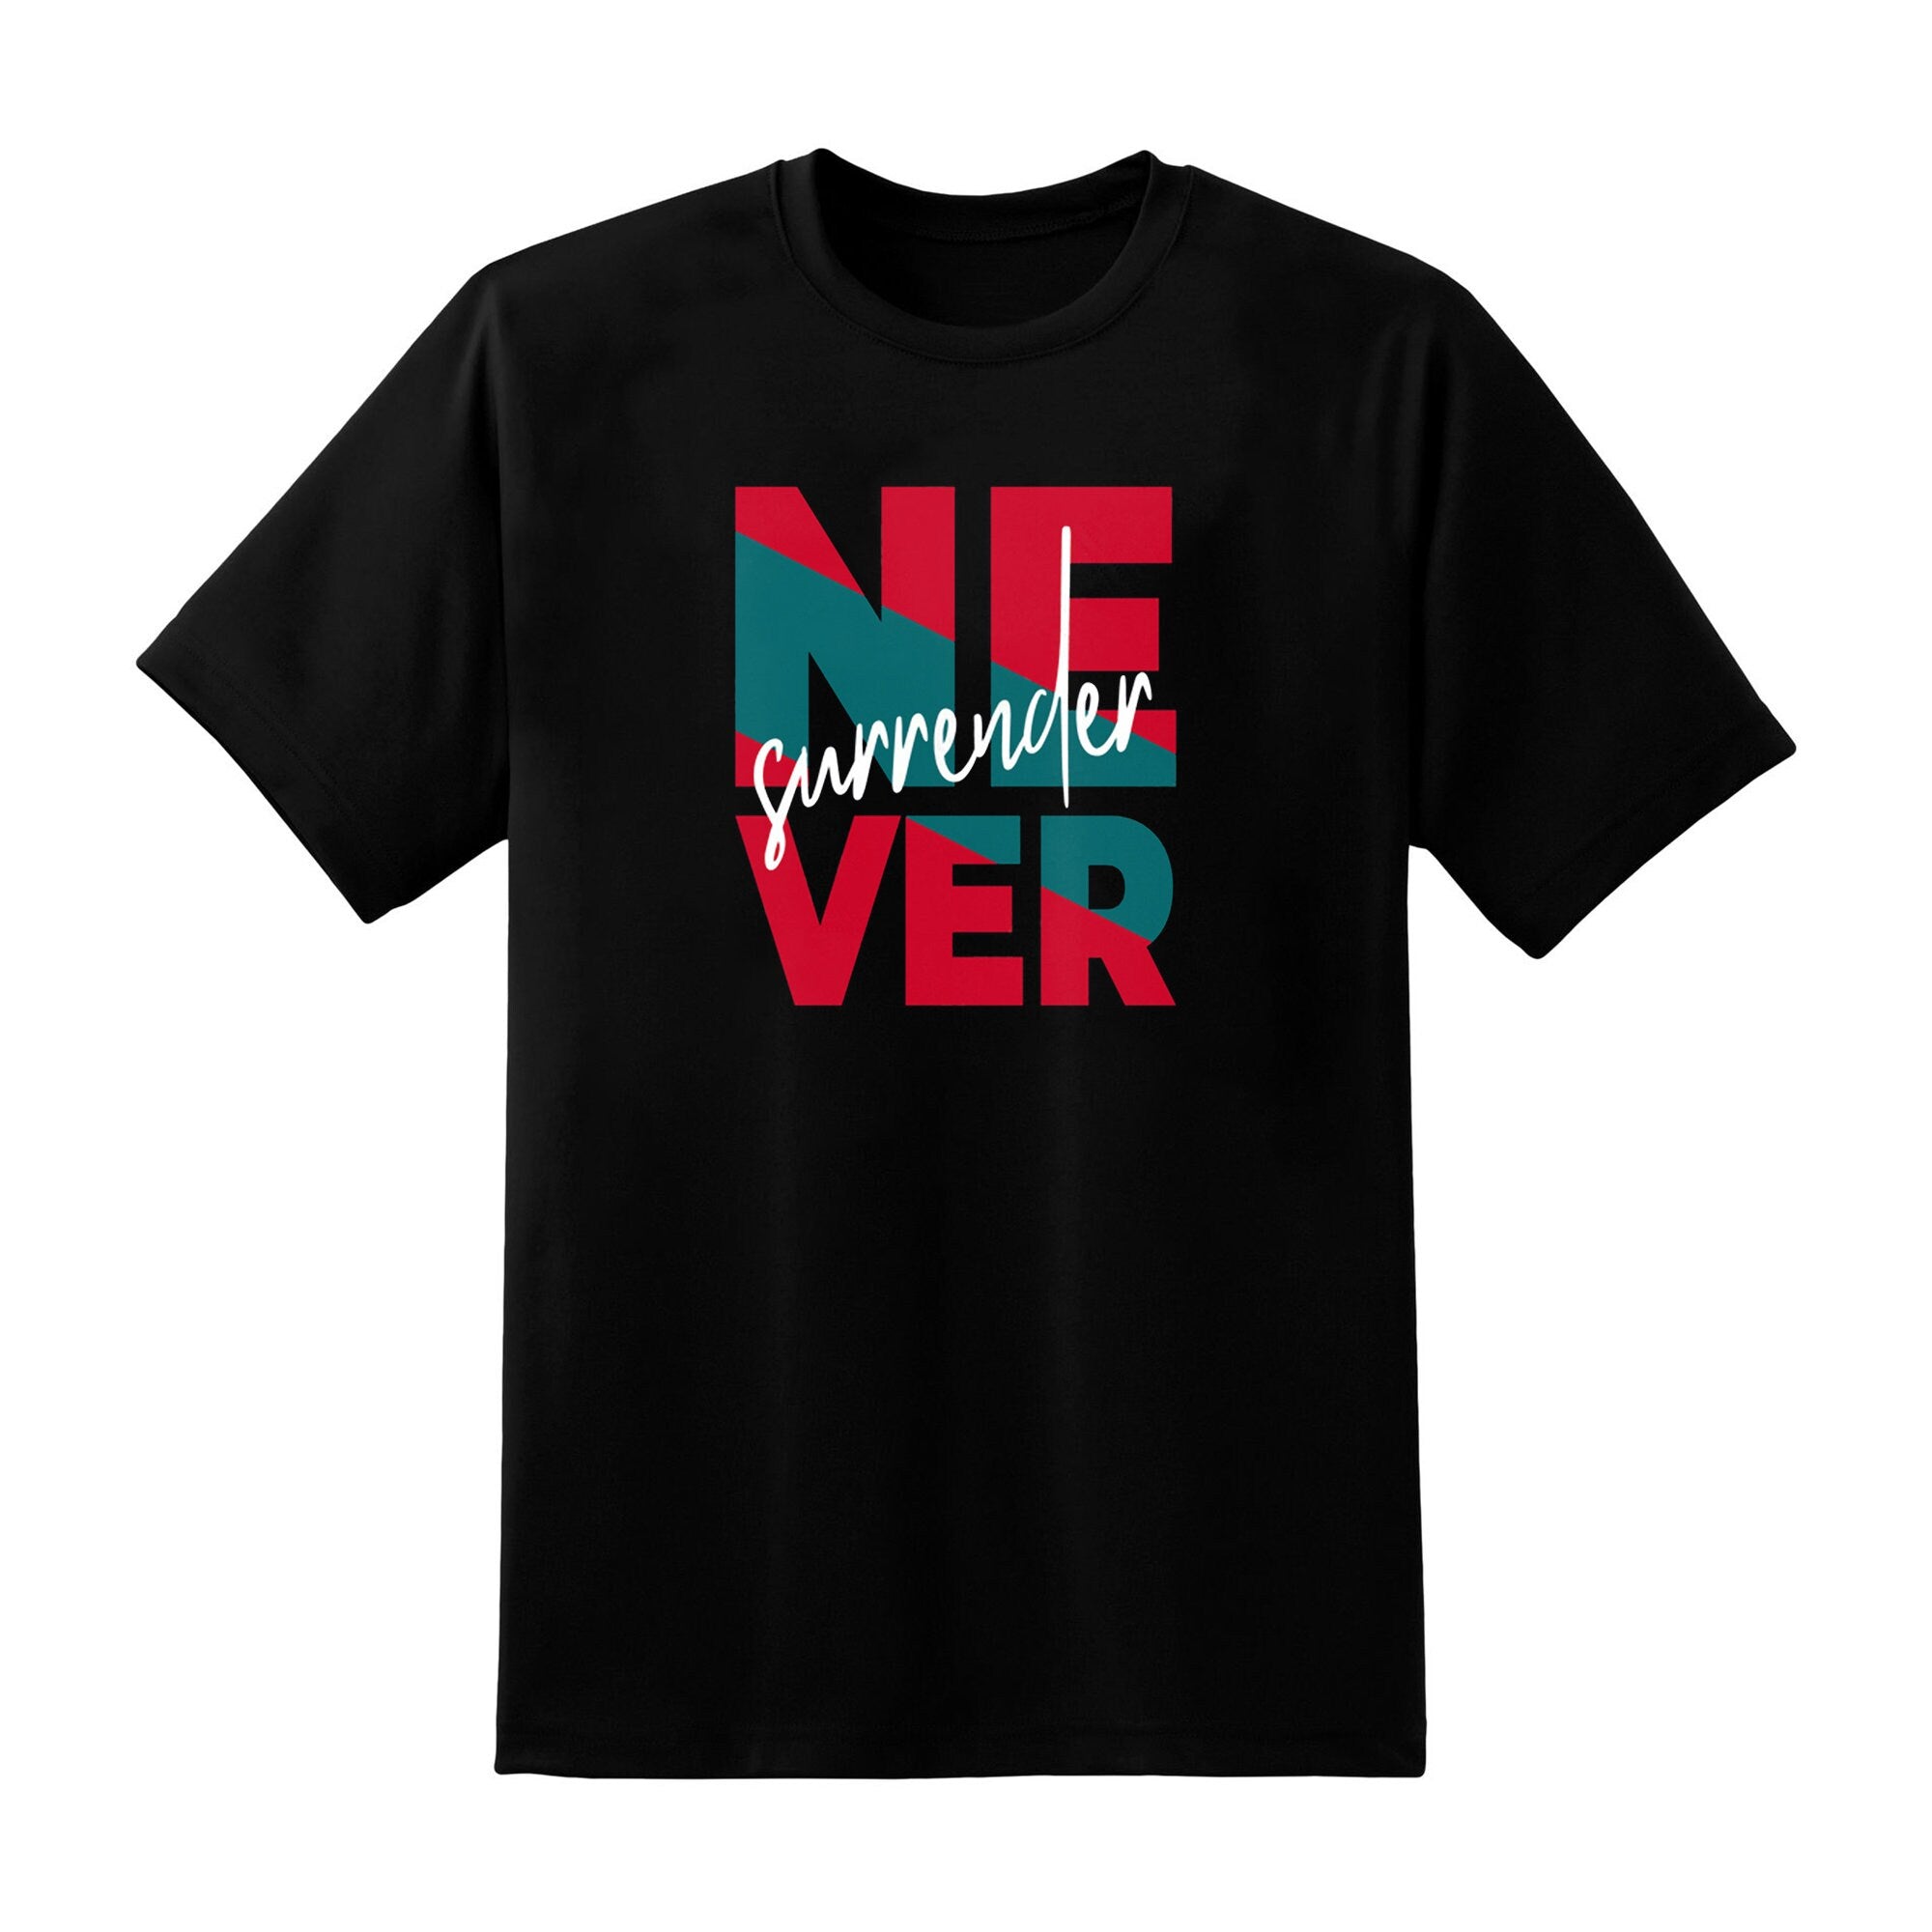 Skitongift Never Surrender Modern Typography Black T Shirt Funny Shirt, gifts for Dad Mom,Gifts for Him, Her, Gifts for Dad Mom